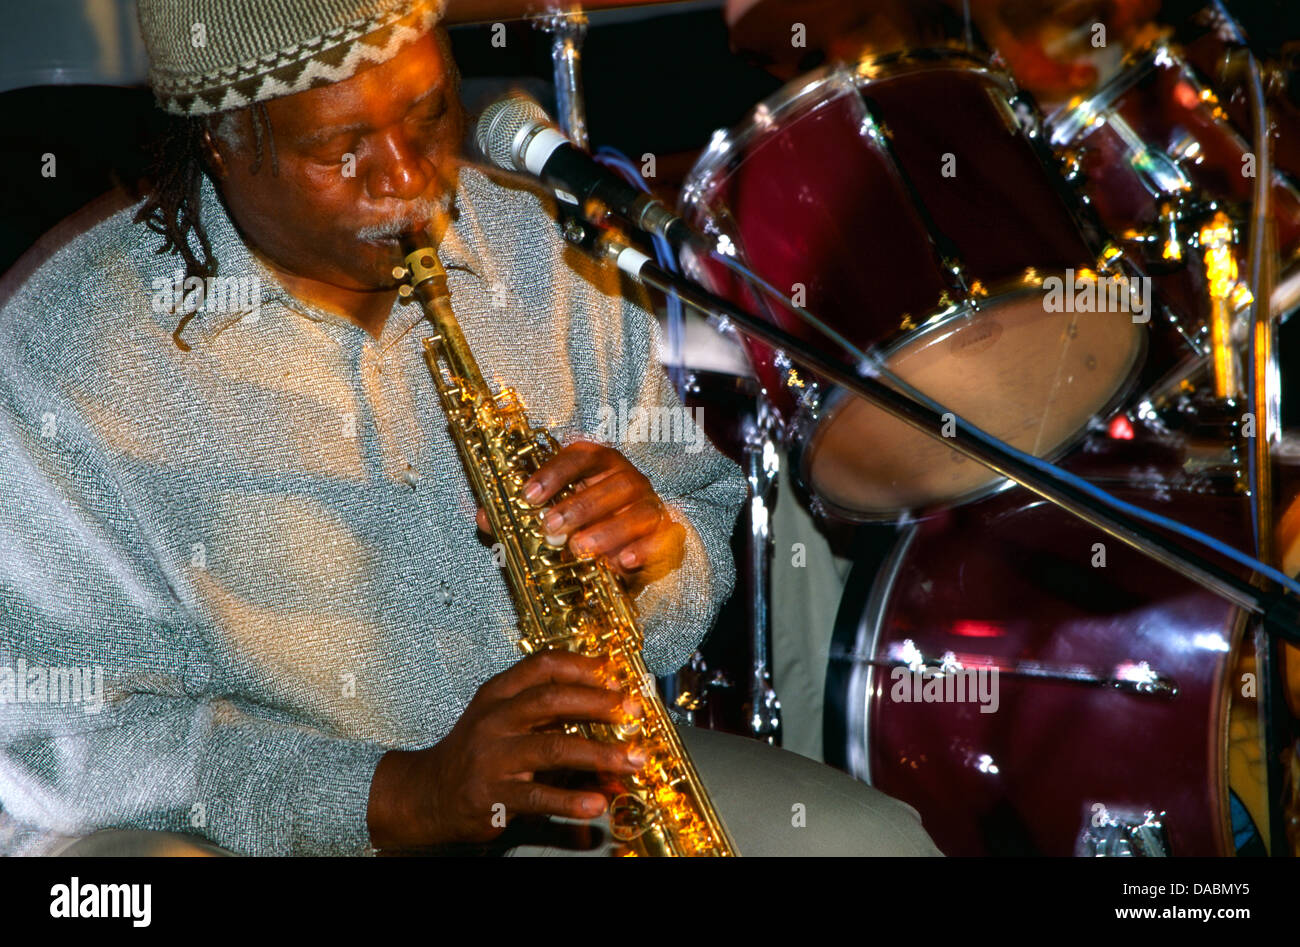 Late night jazz at the old castle as part of the Foto Festa 2004 in Maputo, Mozambique Stock Photo